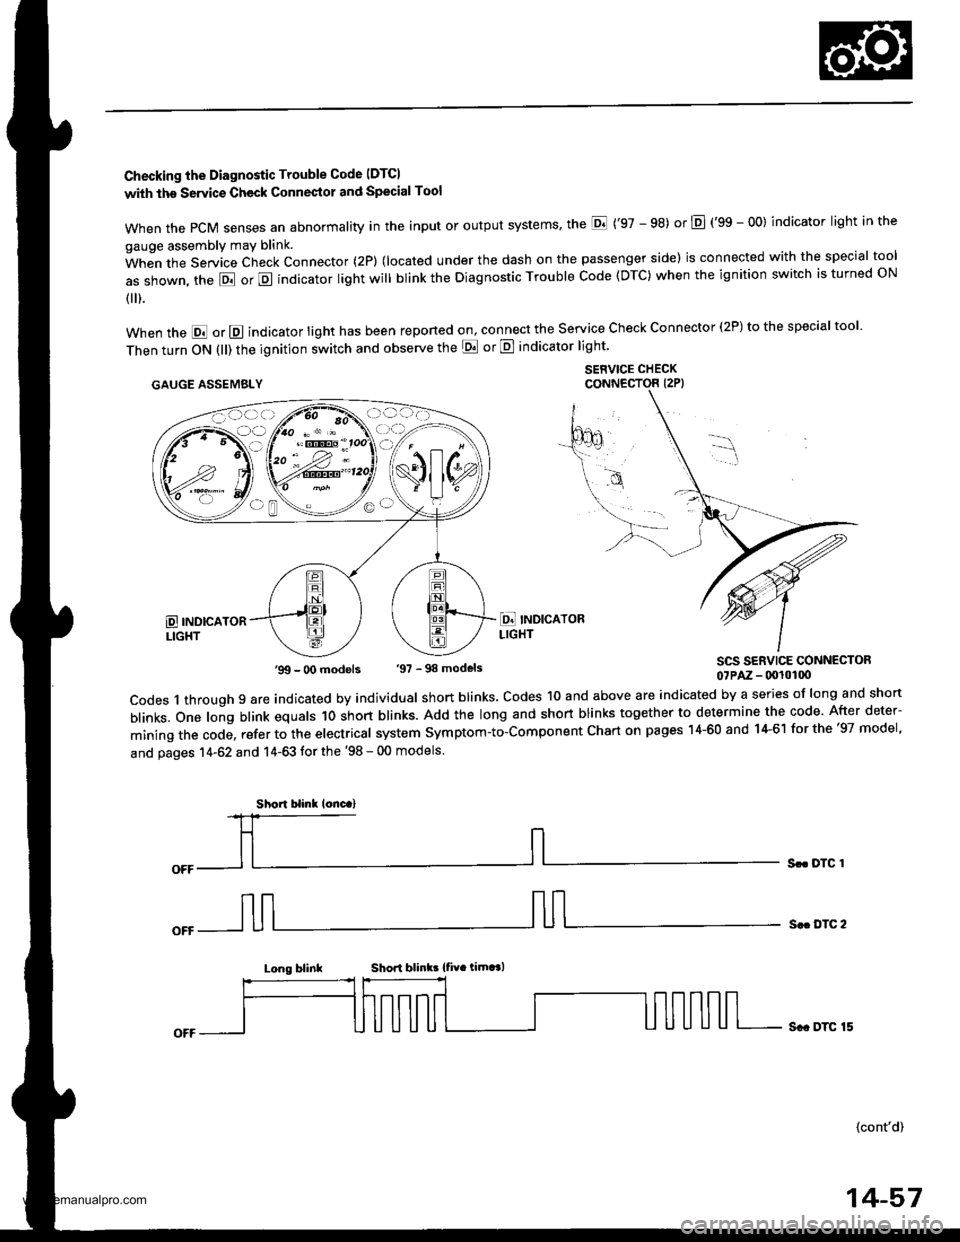 HONDA CR-V 1998 RD1-RD3 / 1.G Workshop Manual 
Checking the Diagnostic Trouble Code IDTCI
with the Servic€ Check Connestol and Special Tool
when the PcM senses an abnormality in the input or output systems the E (97 - 98) or E (gS - OO) indic